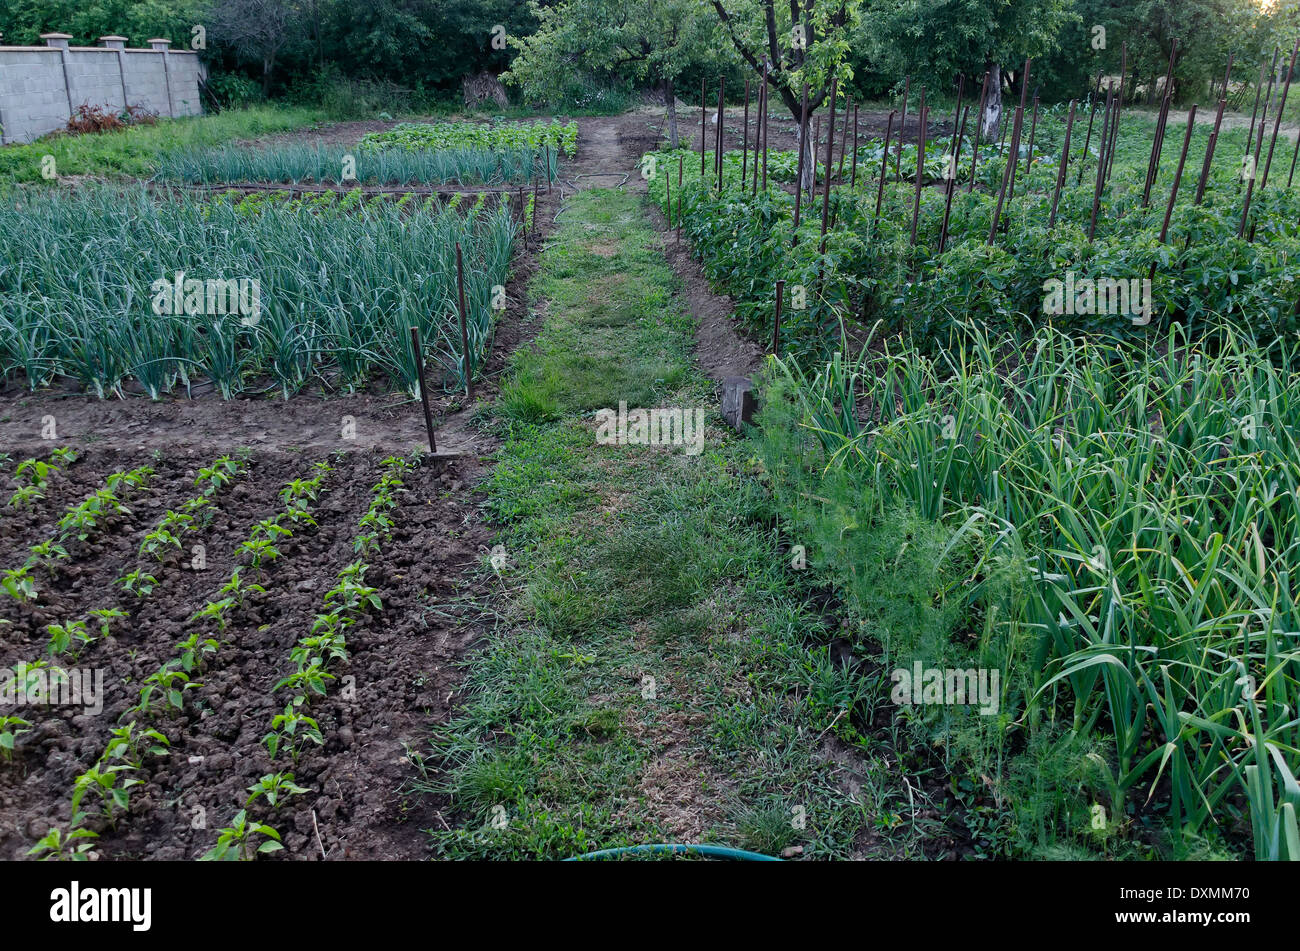 Beauty garden with cultivate of fresh vegetables Stock Photo